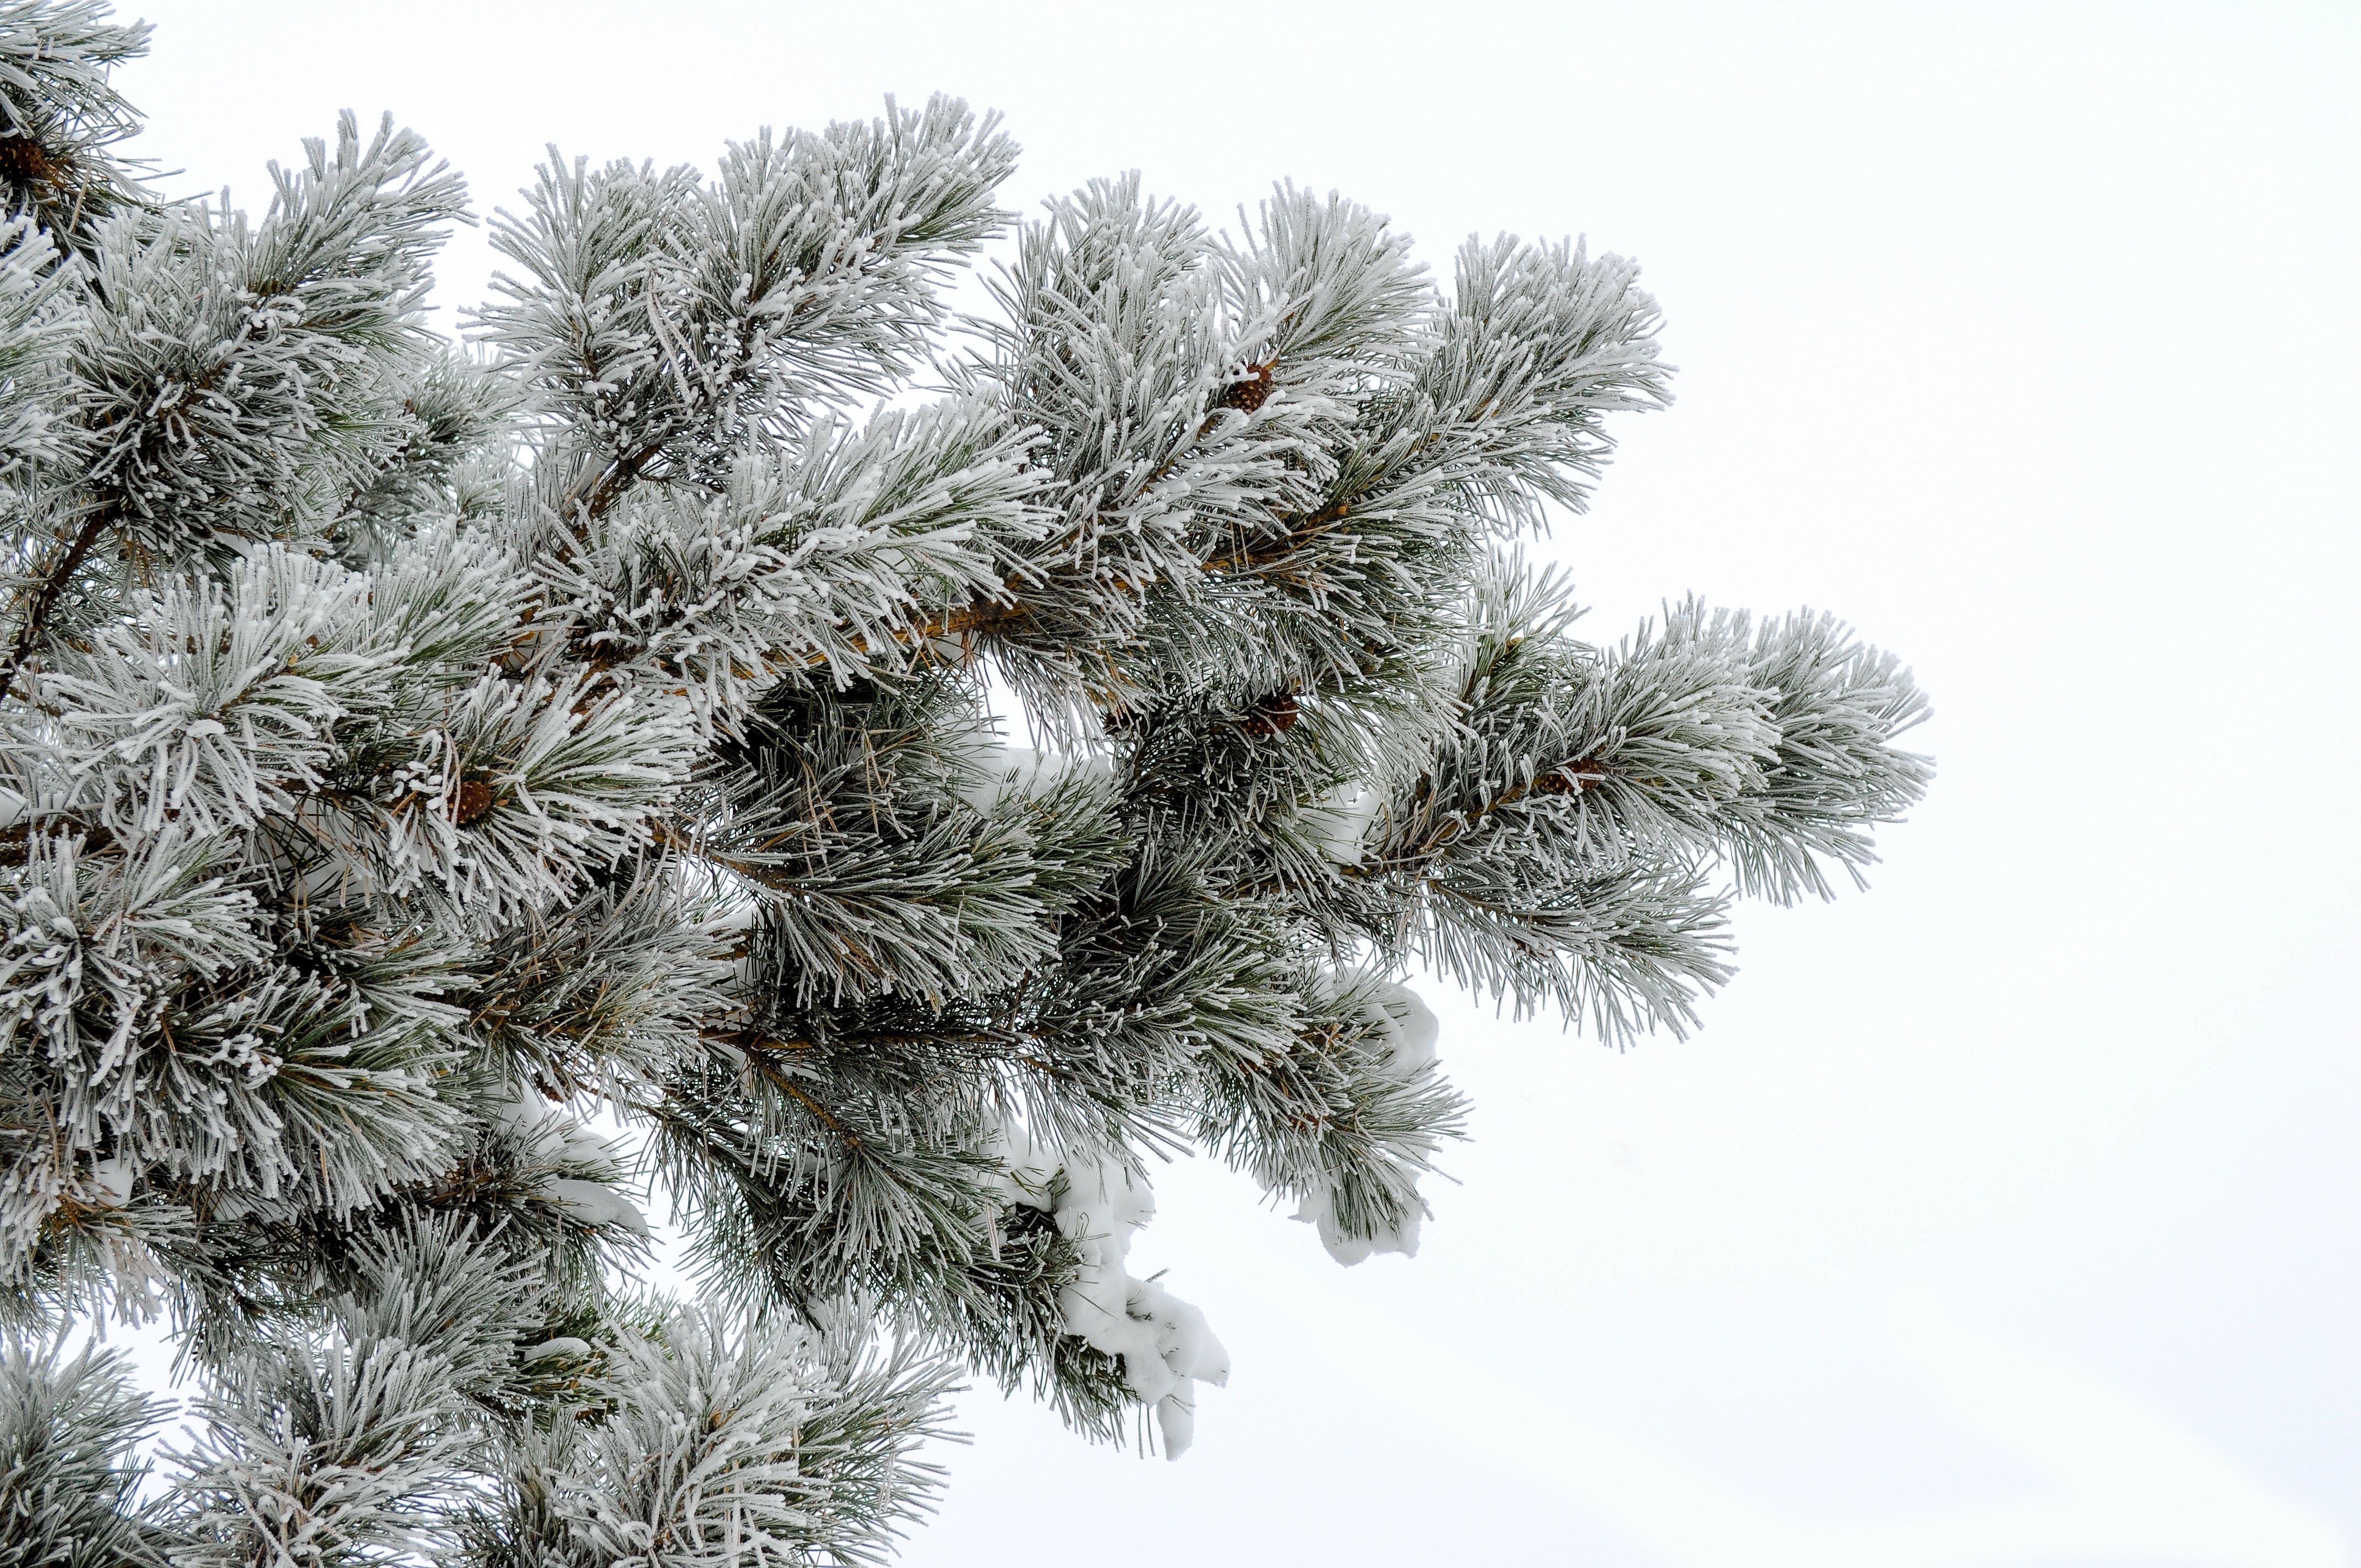 Wallpapers winter woody plant free images on the desktop